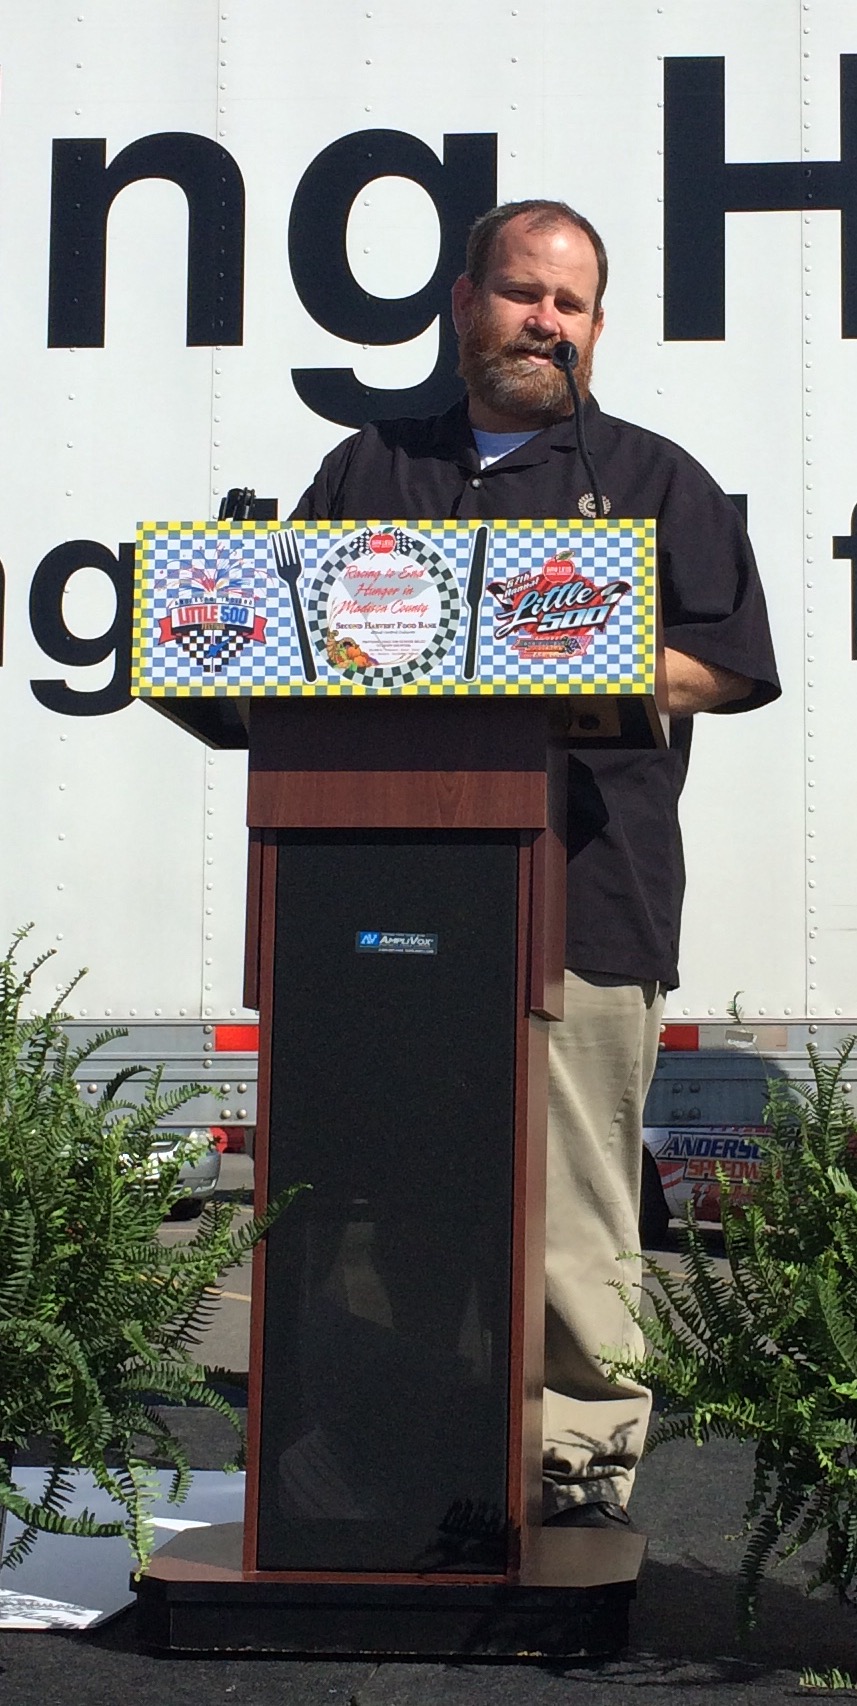 Payless Little 500 Festival Press Conference | Woof Boom Radio News